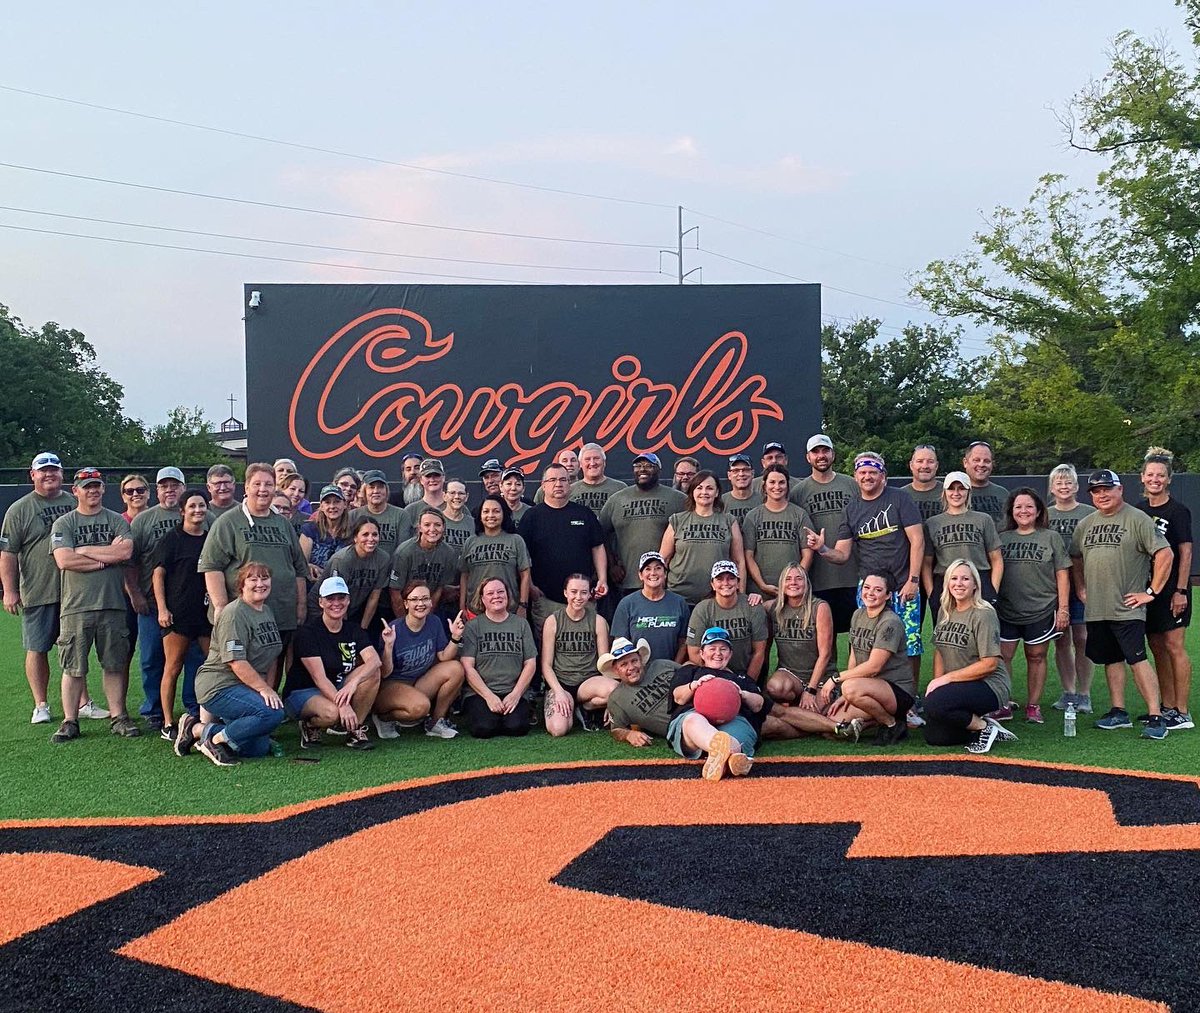 The HPTC staff had a blast working on team building by playing a kickball tournament on the OSU Cowgirls softball field Tuesday evening in Stillwater.

Congrats to Mr. Gaines team for winning the tournament with Jenny Hamilton scoring the winning game point! https://t.co/vWUryEYHIC